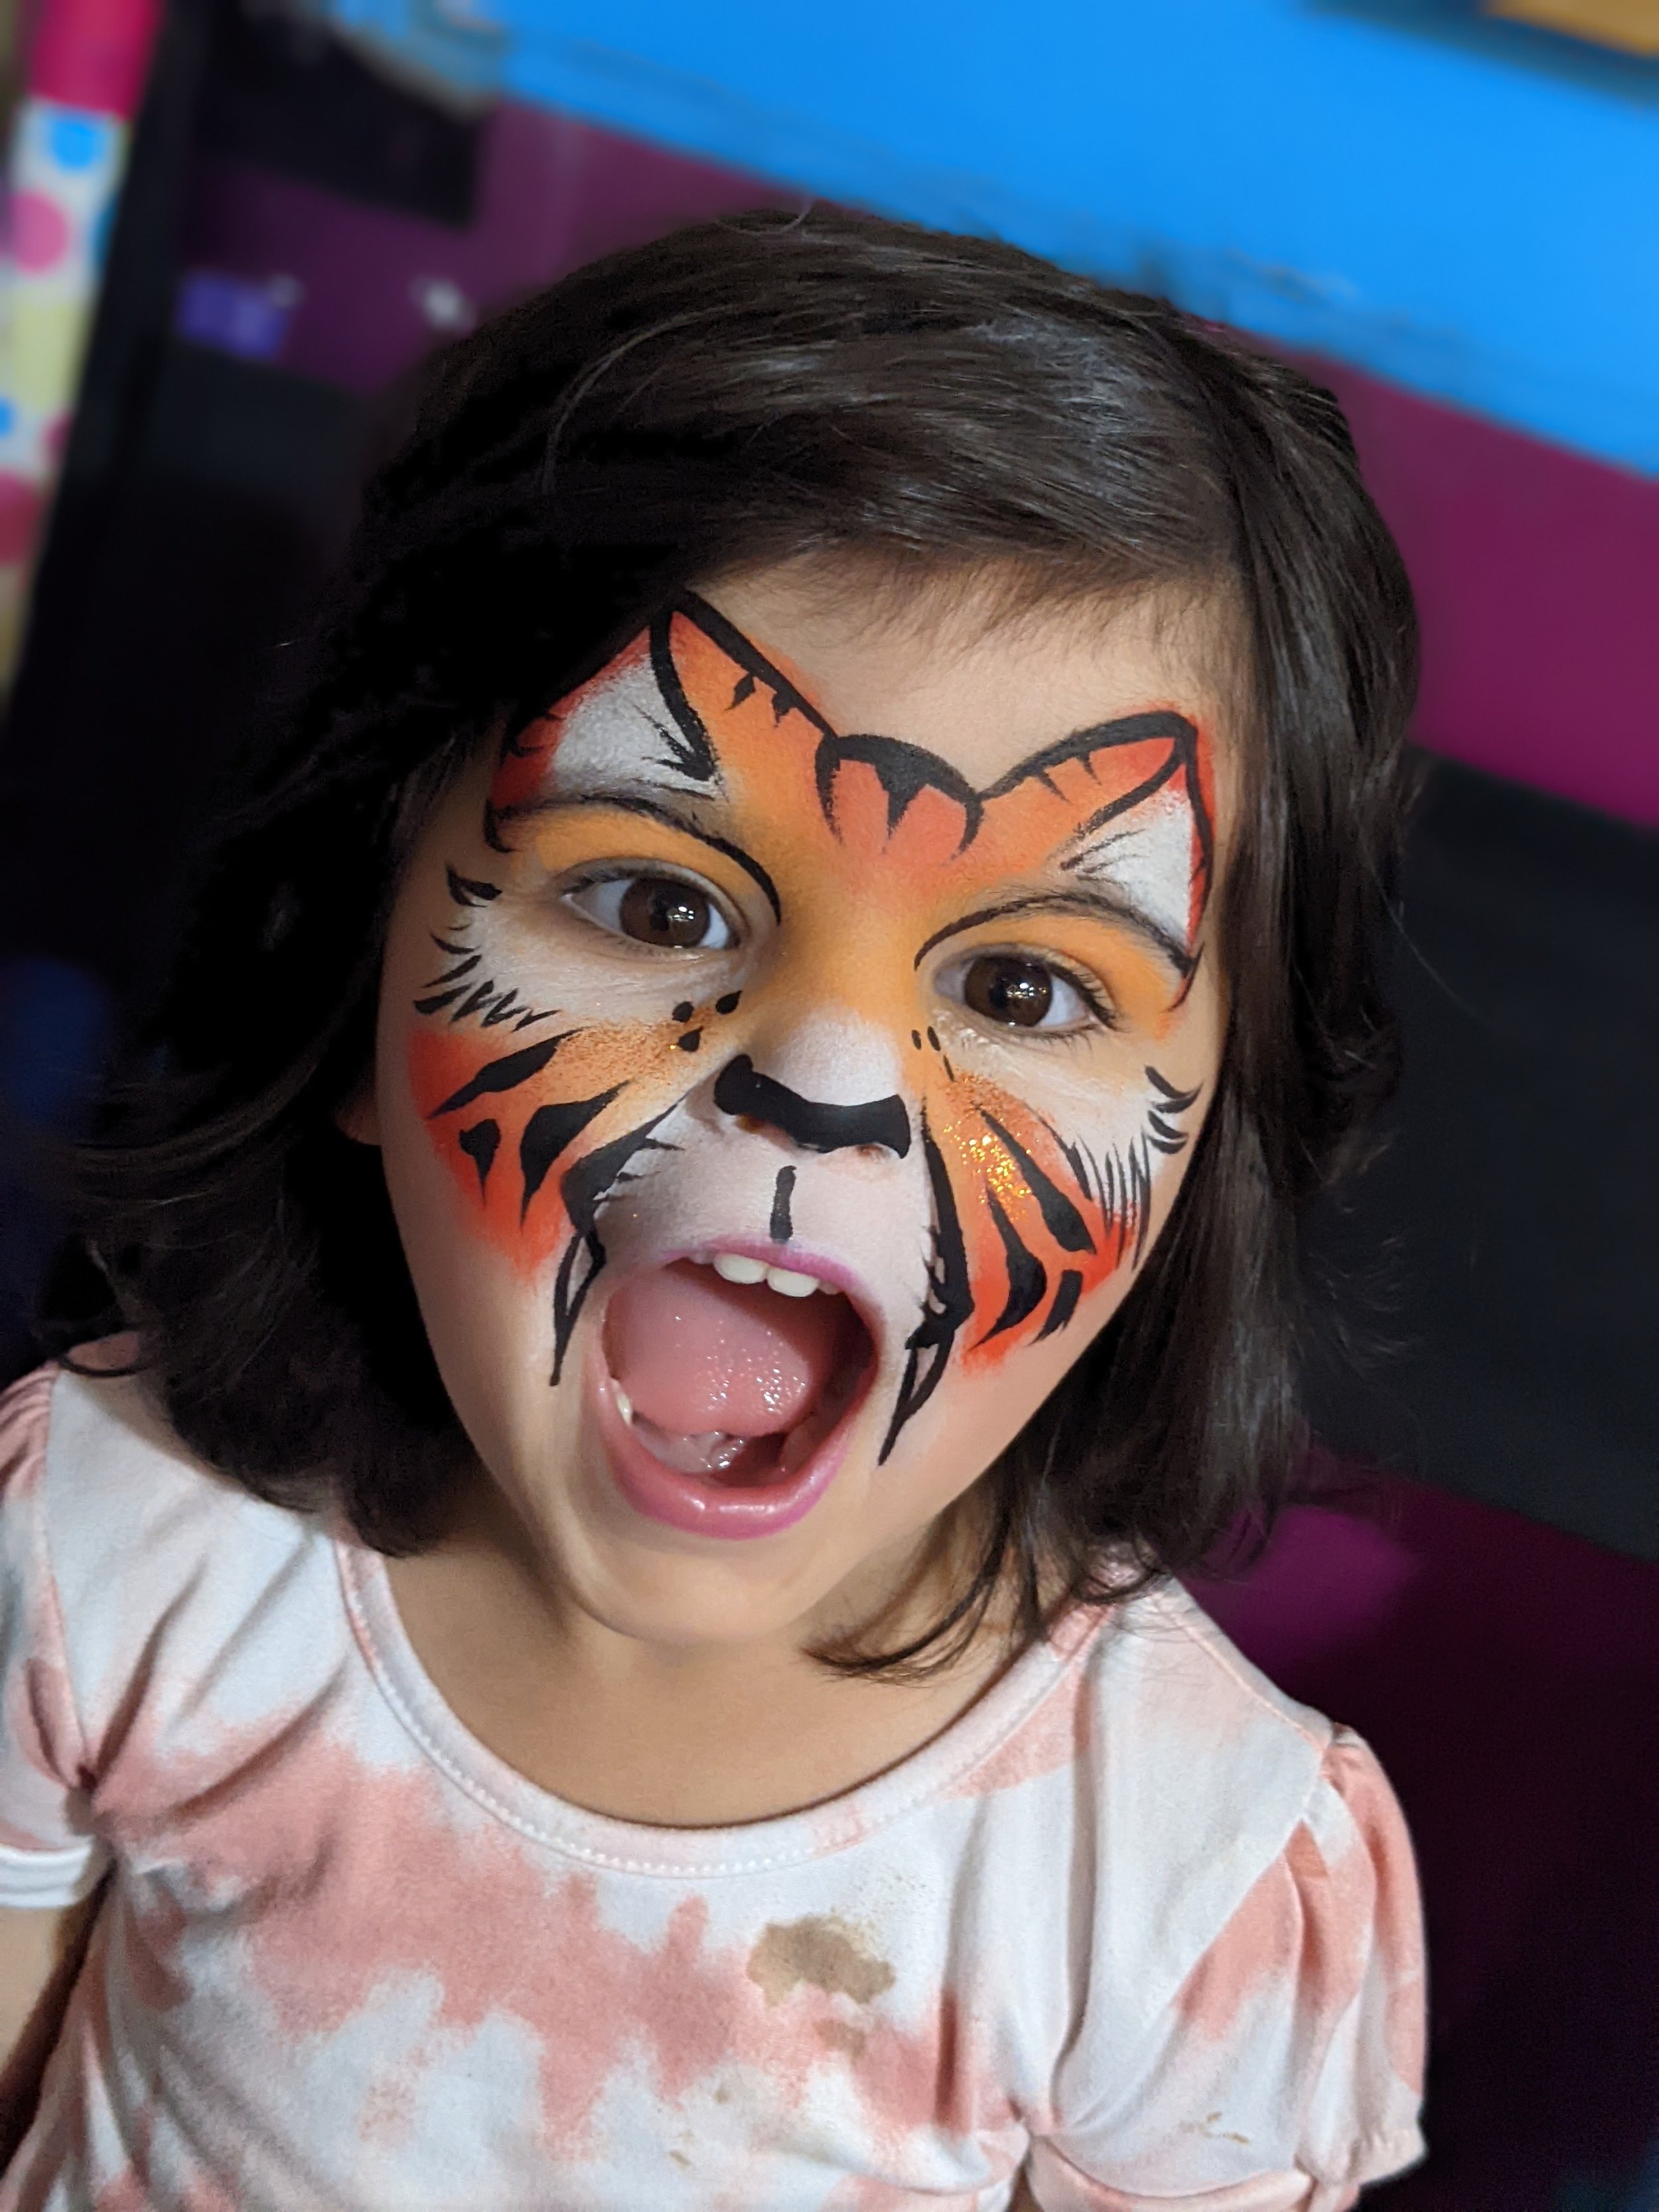 easy tiger face painting designs